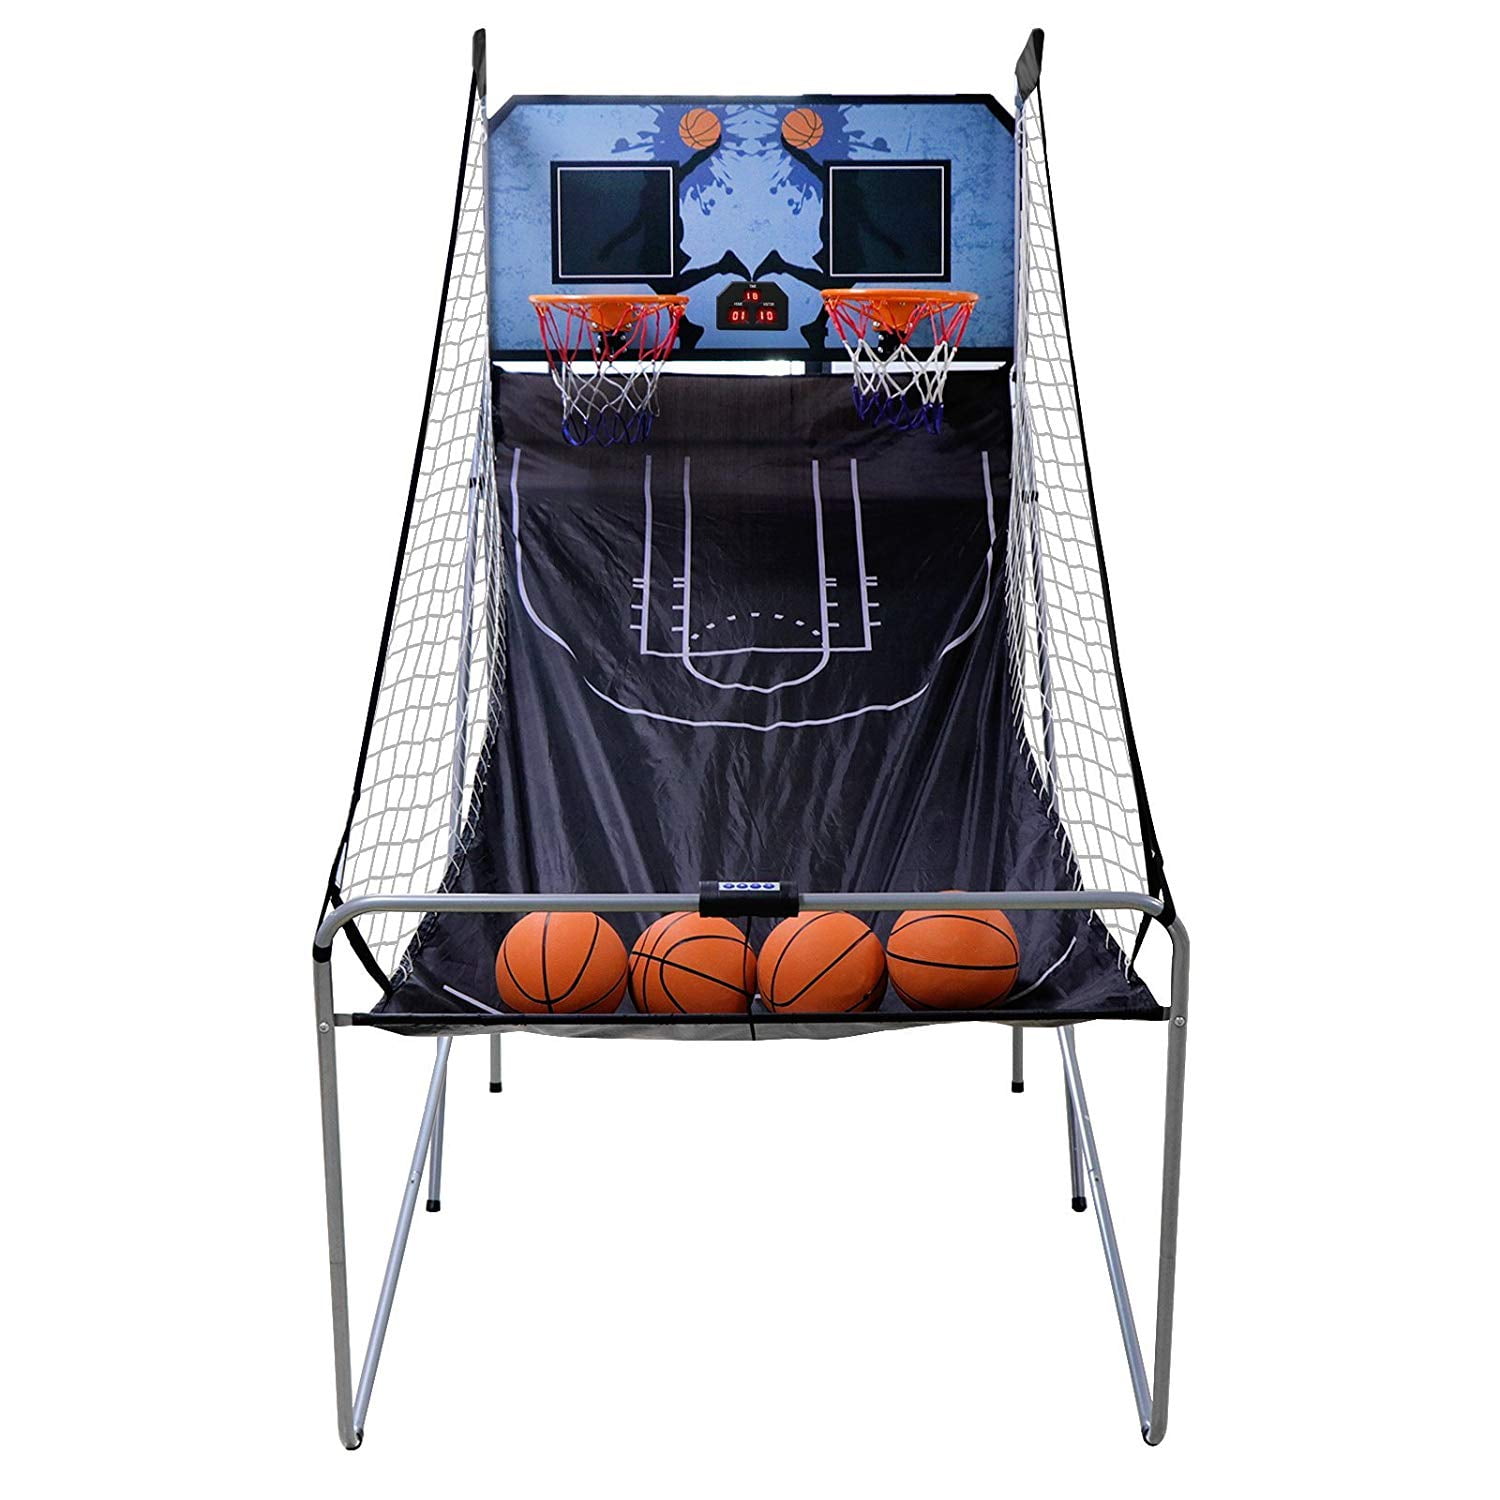 2 player LED Electronic Basketball Double Shot Hoops Arcade Indoor Sports Game 